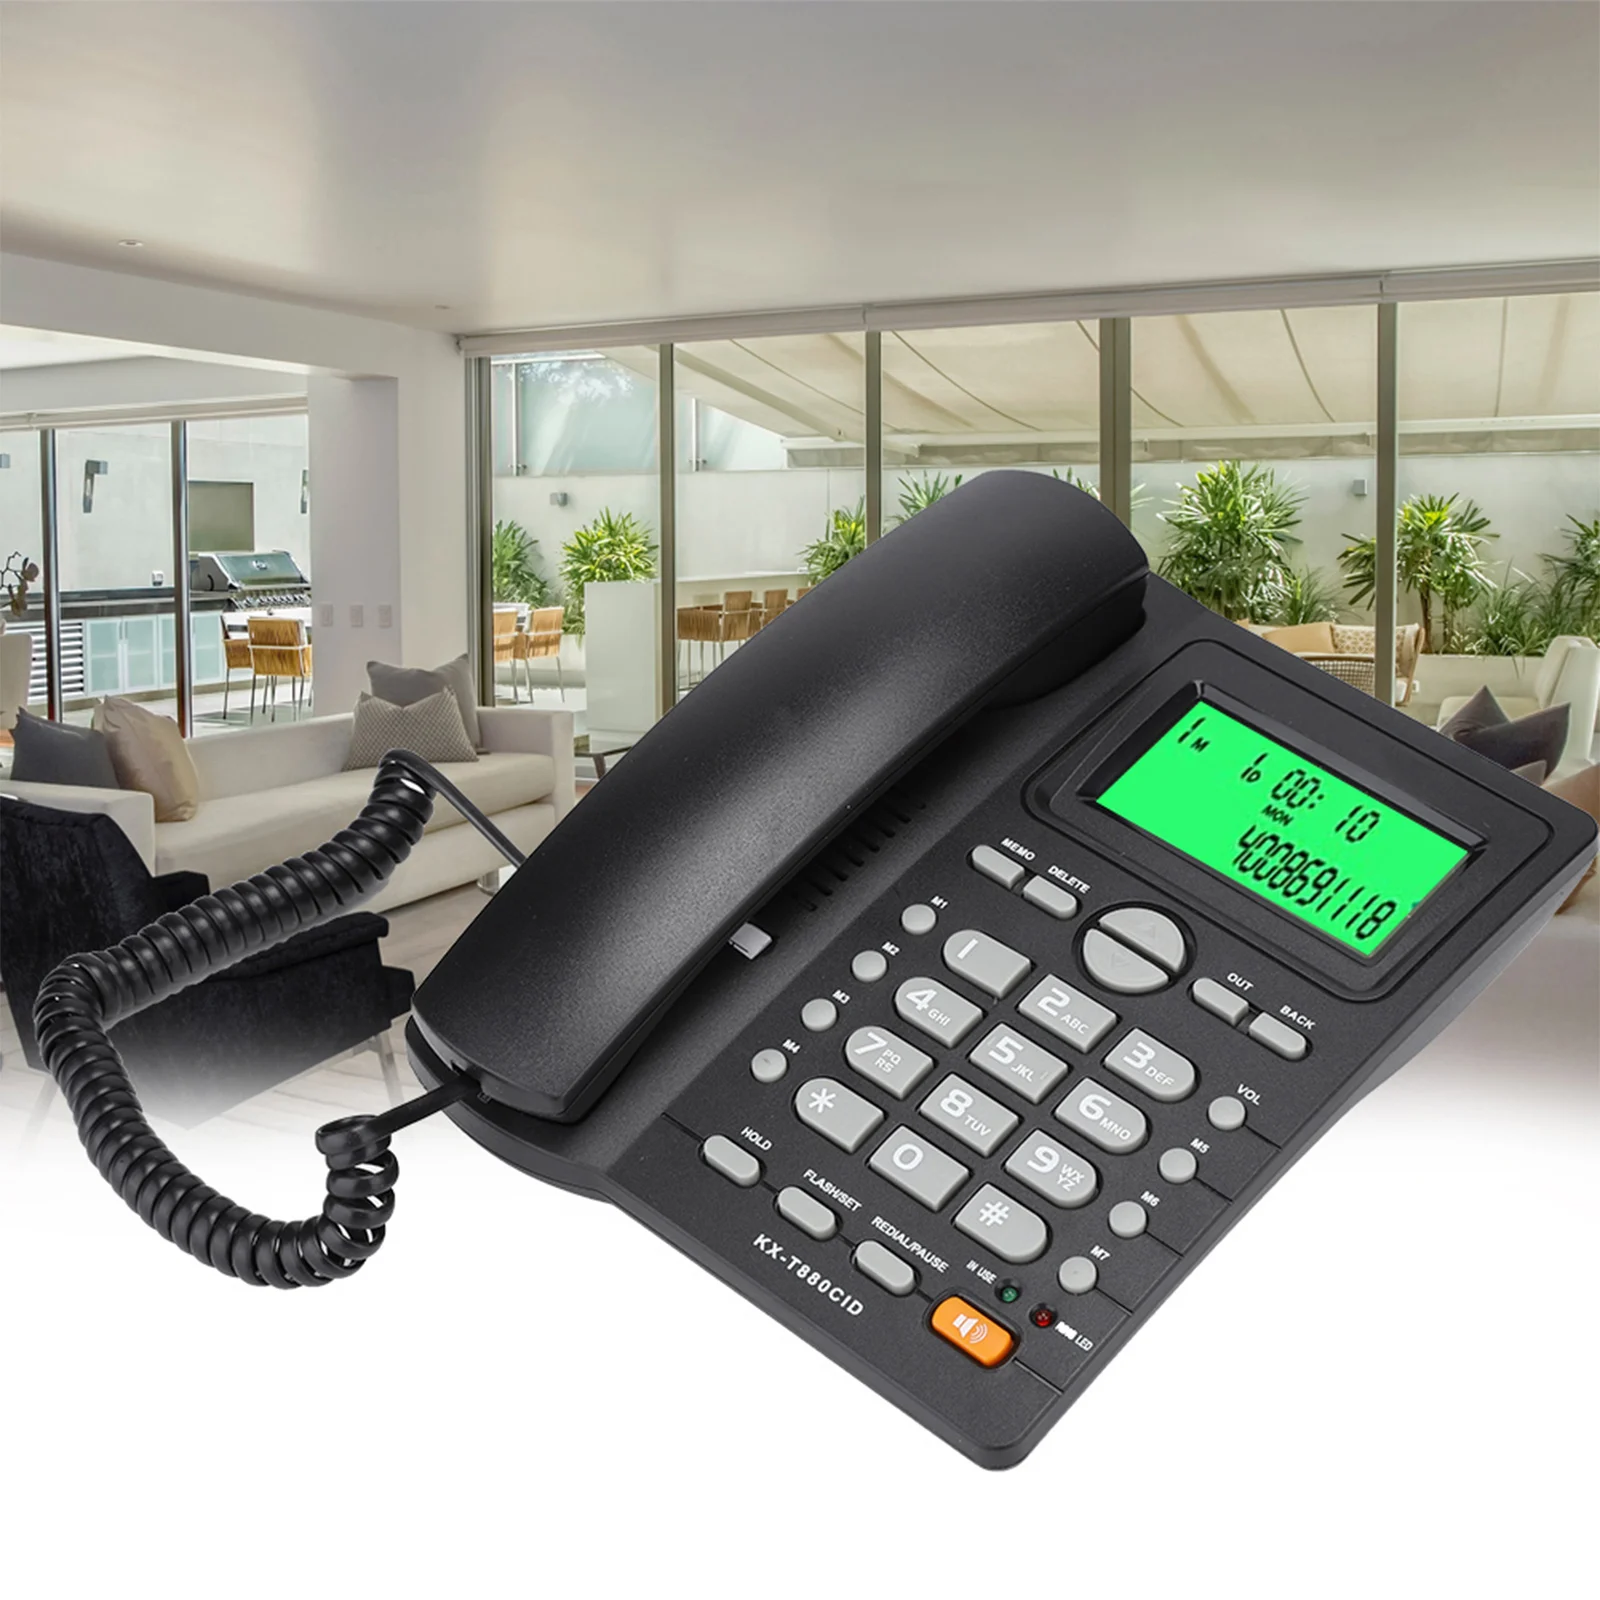 

Landline Phone Desktop Corded Fixed Phone with Caller ID Display Support Re-dial Pause Mute Function for Home Office Hotel Use